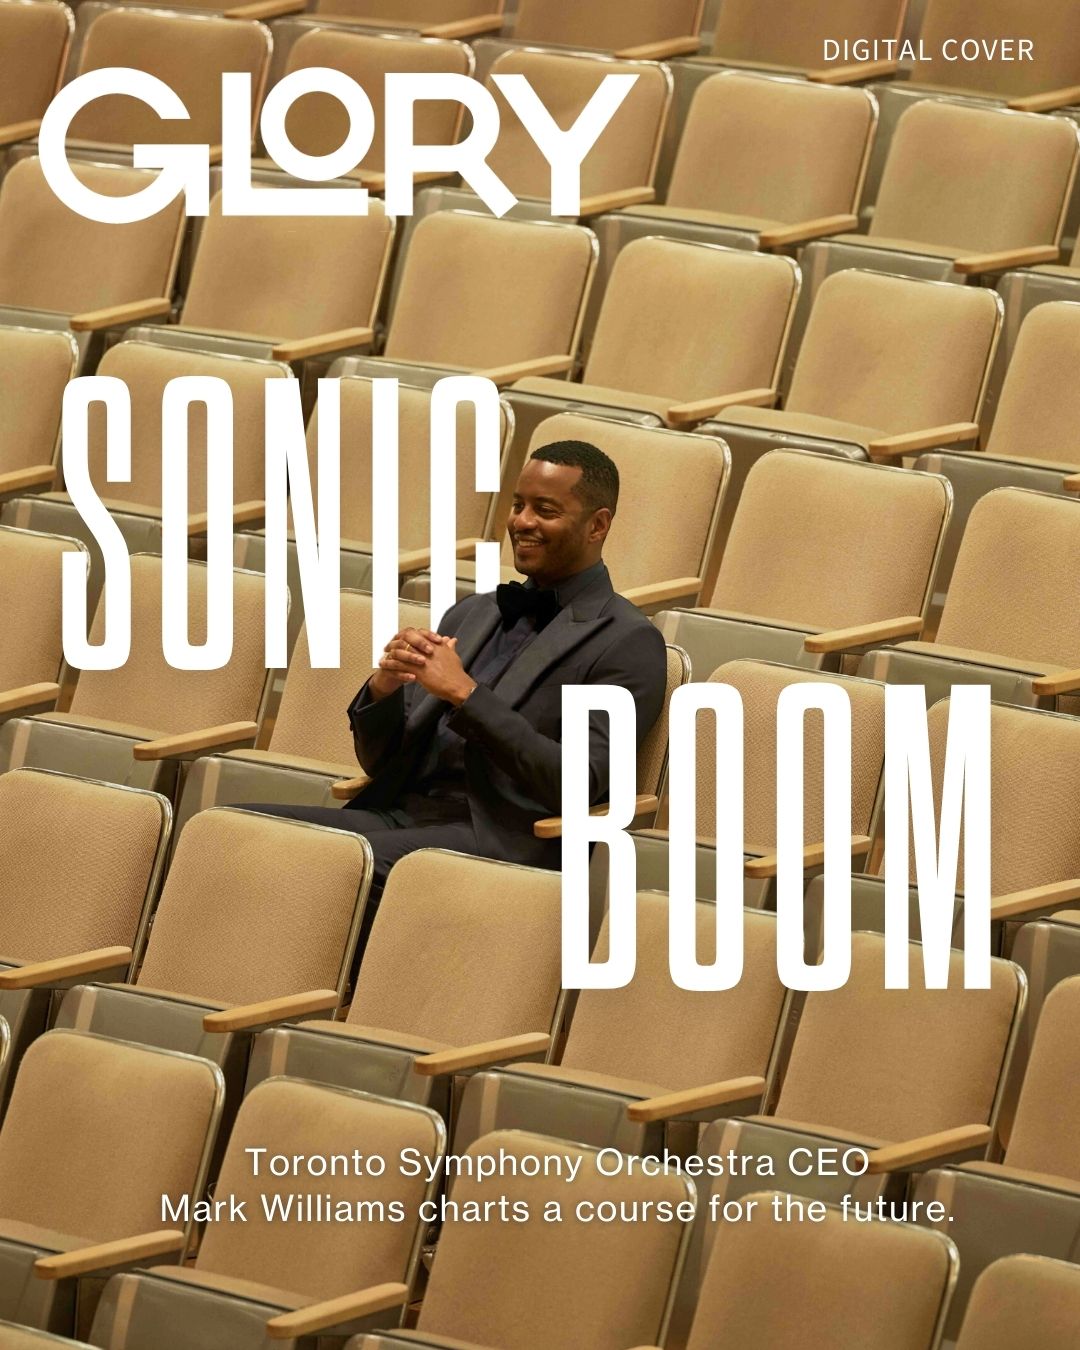 GLORY Magazine cover with the words "Sonic Boom" overtop an image of Toronto Symphony Orchestra CEO Mark Williams, who is smiling in a black tuxedo and seated in an empty auditorium.